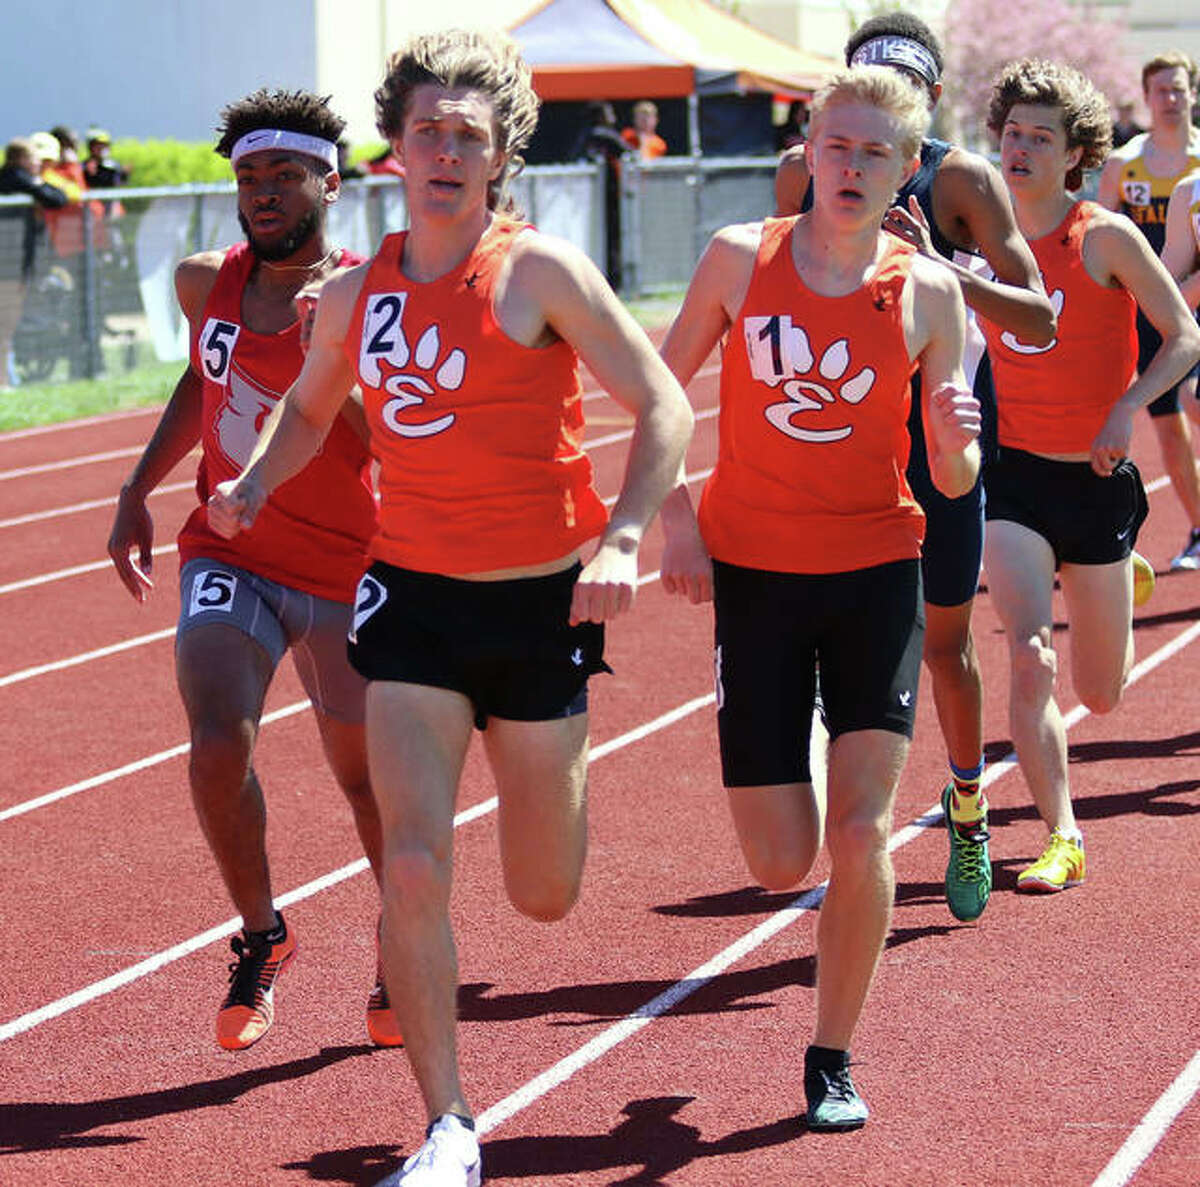 Alton’s Cassius Havis (left) runs outside Edwardsville’s Roland Prenzler (front) and Jack Pifer on the lead in the 1,600-meter run at the Winston Brown Invite on April 20 in Edwardsville. On Wednesday at the SWC Meet in Collinsville, Havis won the 800 meters and Prenzler was a double-winner in the 1,600 and 3,200.